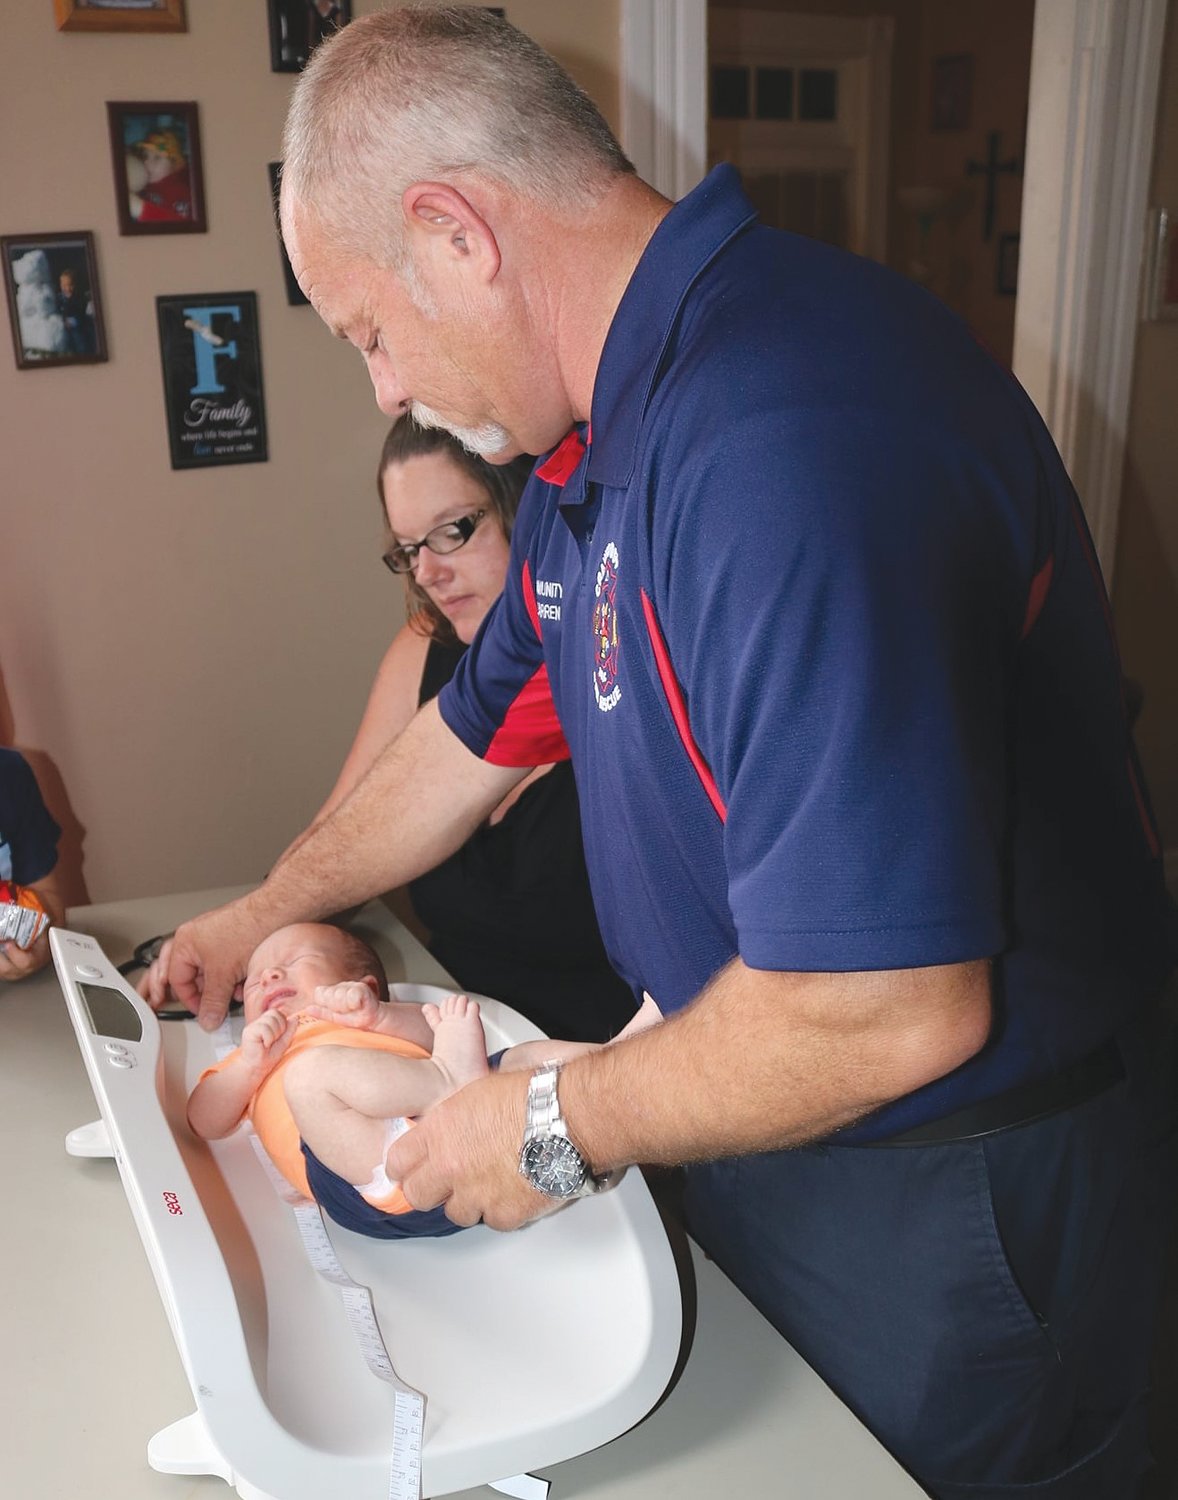 Project Swaddle Paramedic Darren Forman conducts a routine in-home visit with a local mother and baby during the 16 weeks after birth. Forman checks for overall baby and mother health and refers participants to the proper services when needed.